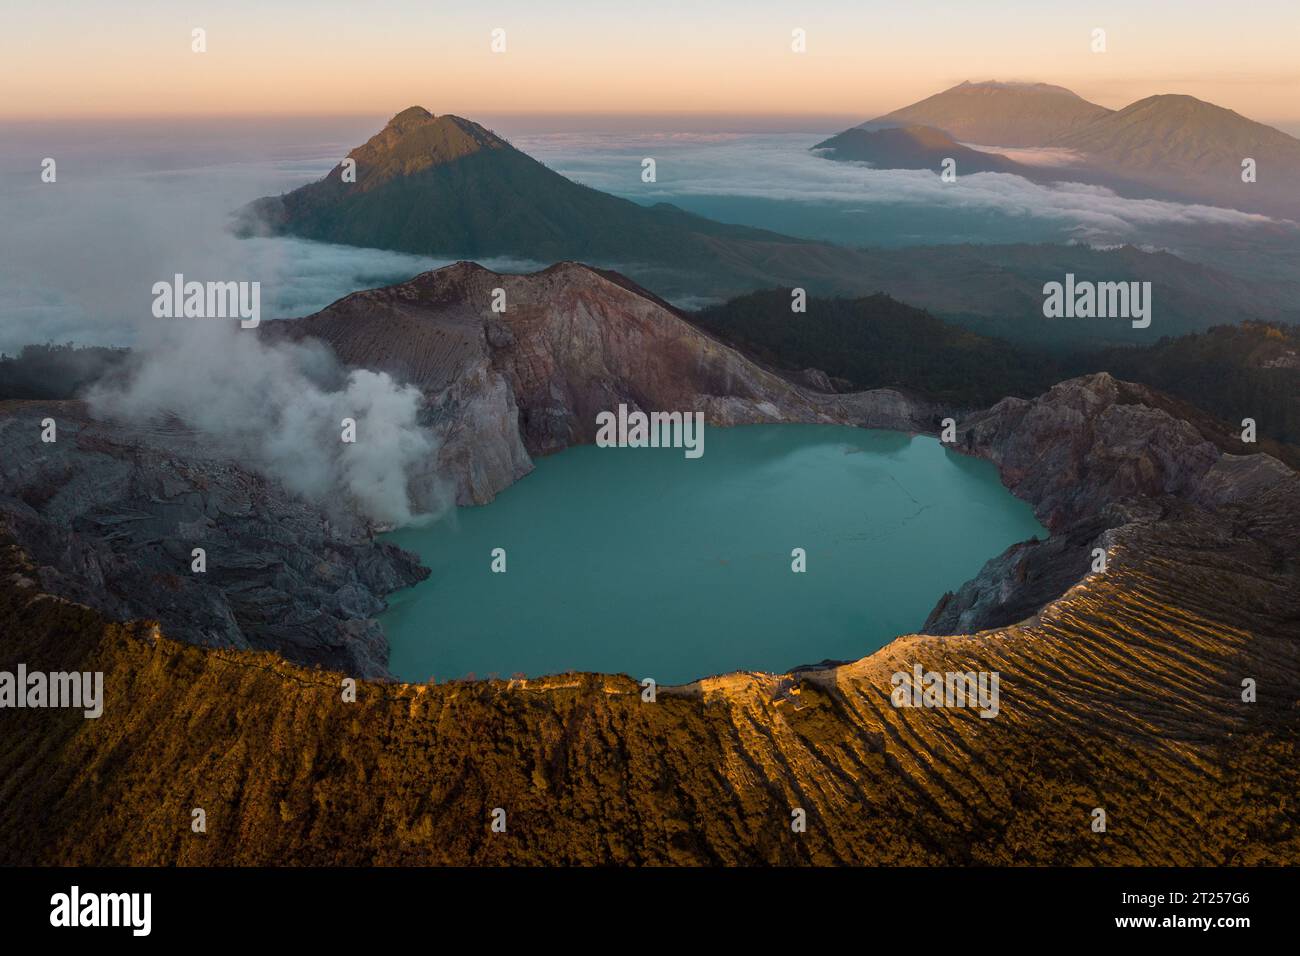 Aerial view of steam rising from Ijen crater between Banyuwangi Regency and Bondowoso Regency, East Java, Indonesia Stock Photo